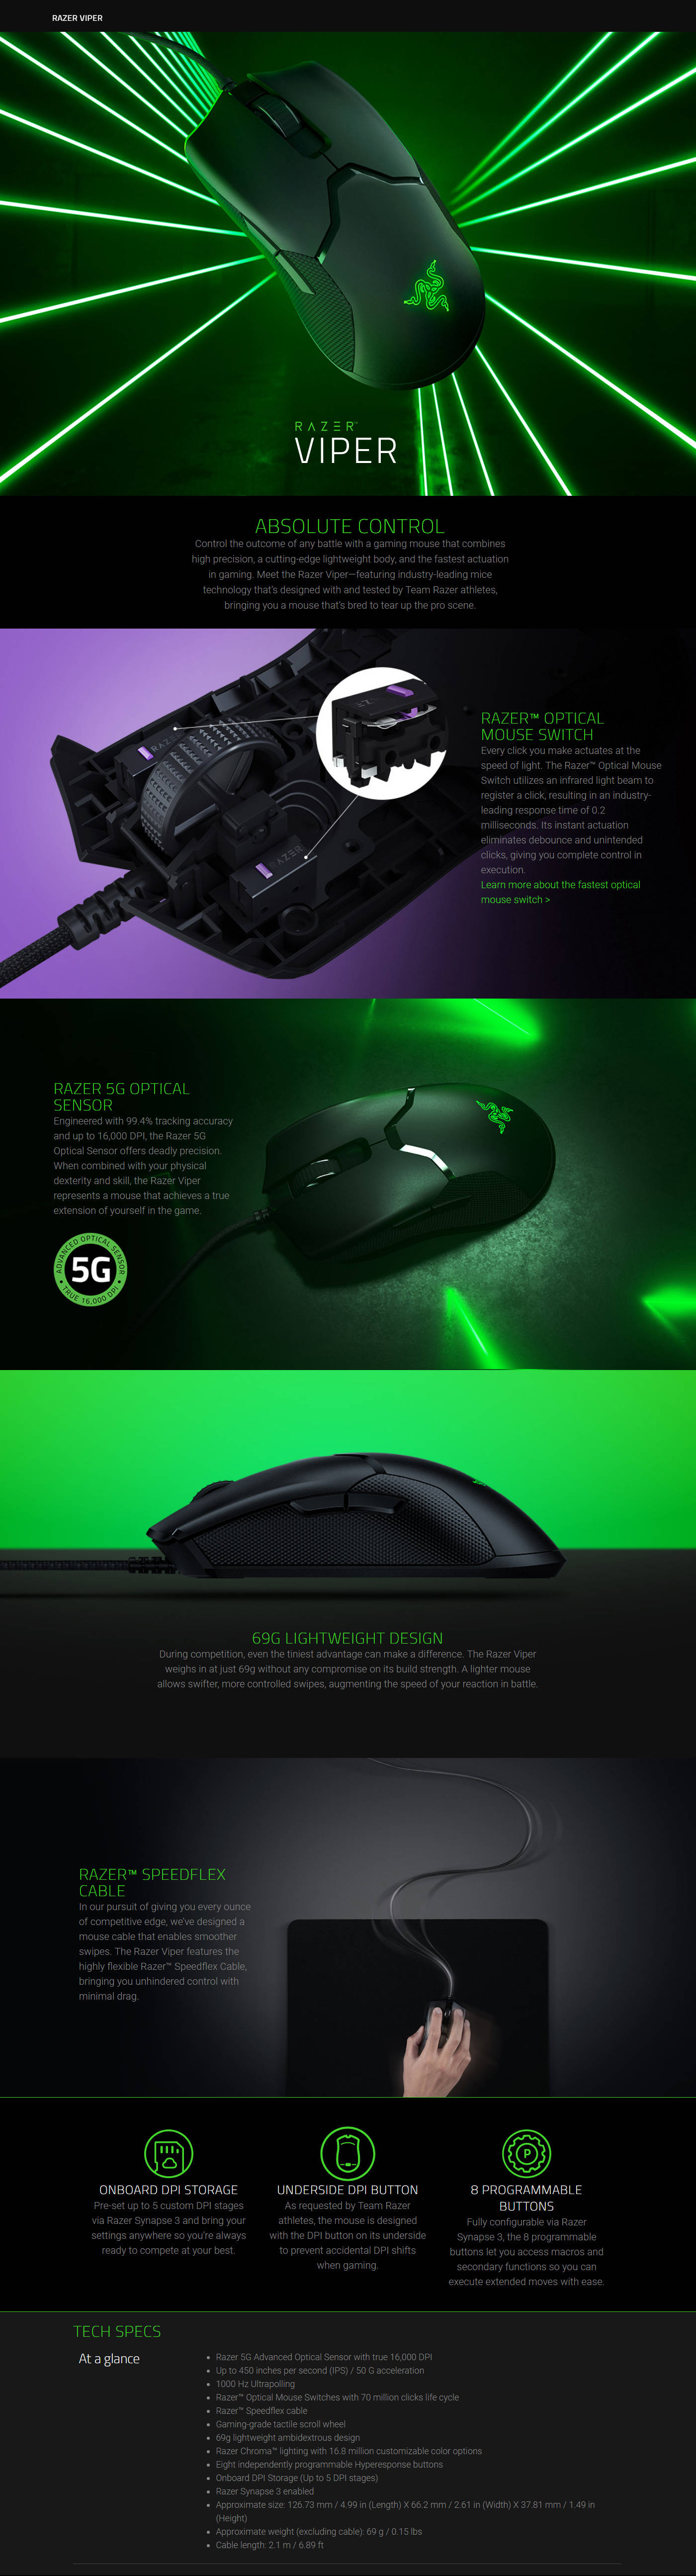 Buy Online Razer Viper Ambidextrous Wired Mouse (RZ01-02550100-R3M1)